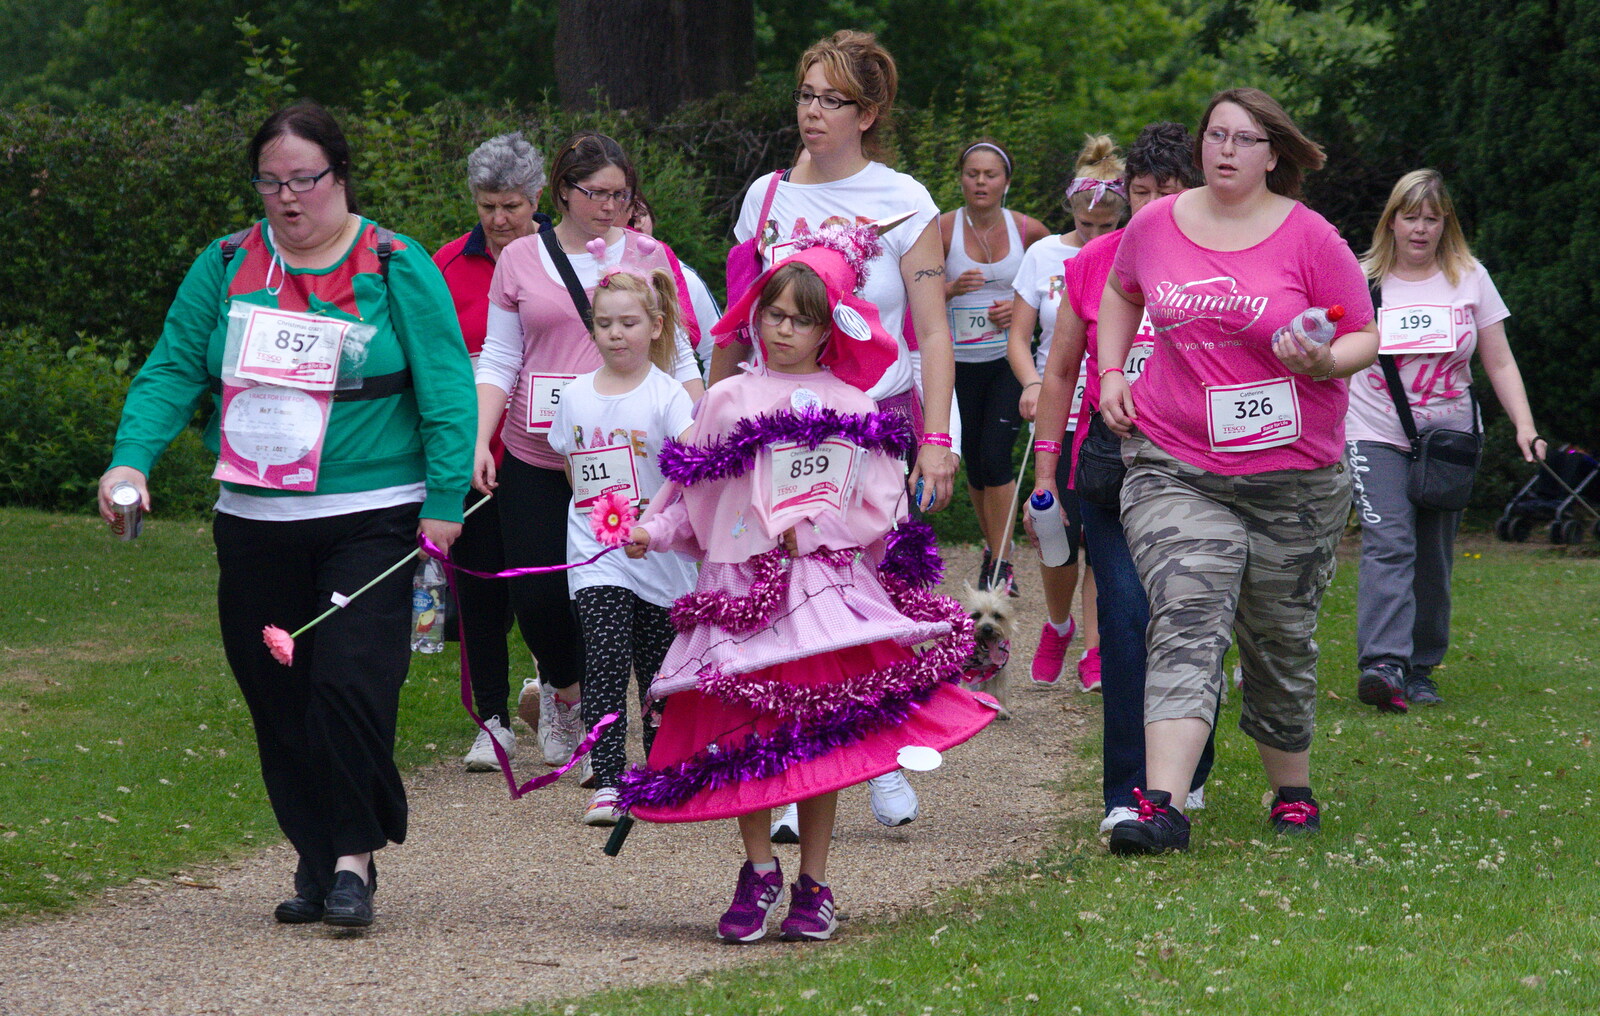 The Christmas Tree walks around from Isobel's Race For Life, Chantry Park, Ipswich - 11th June 2014